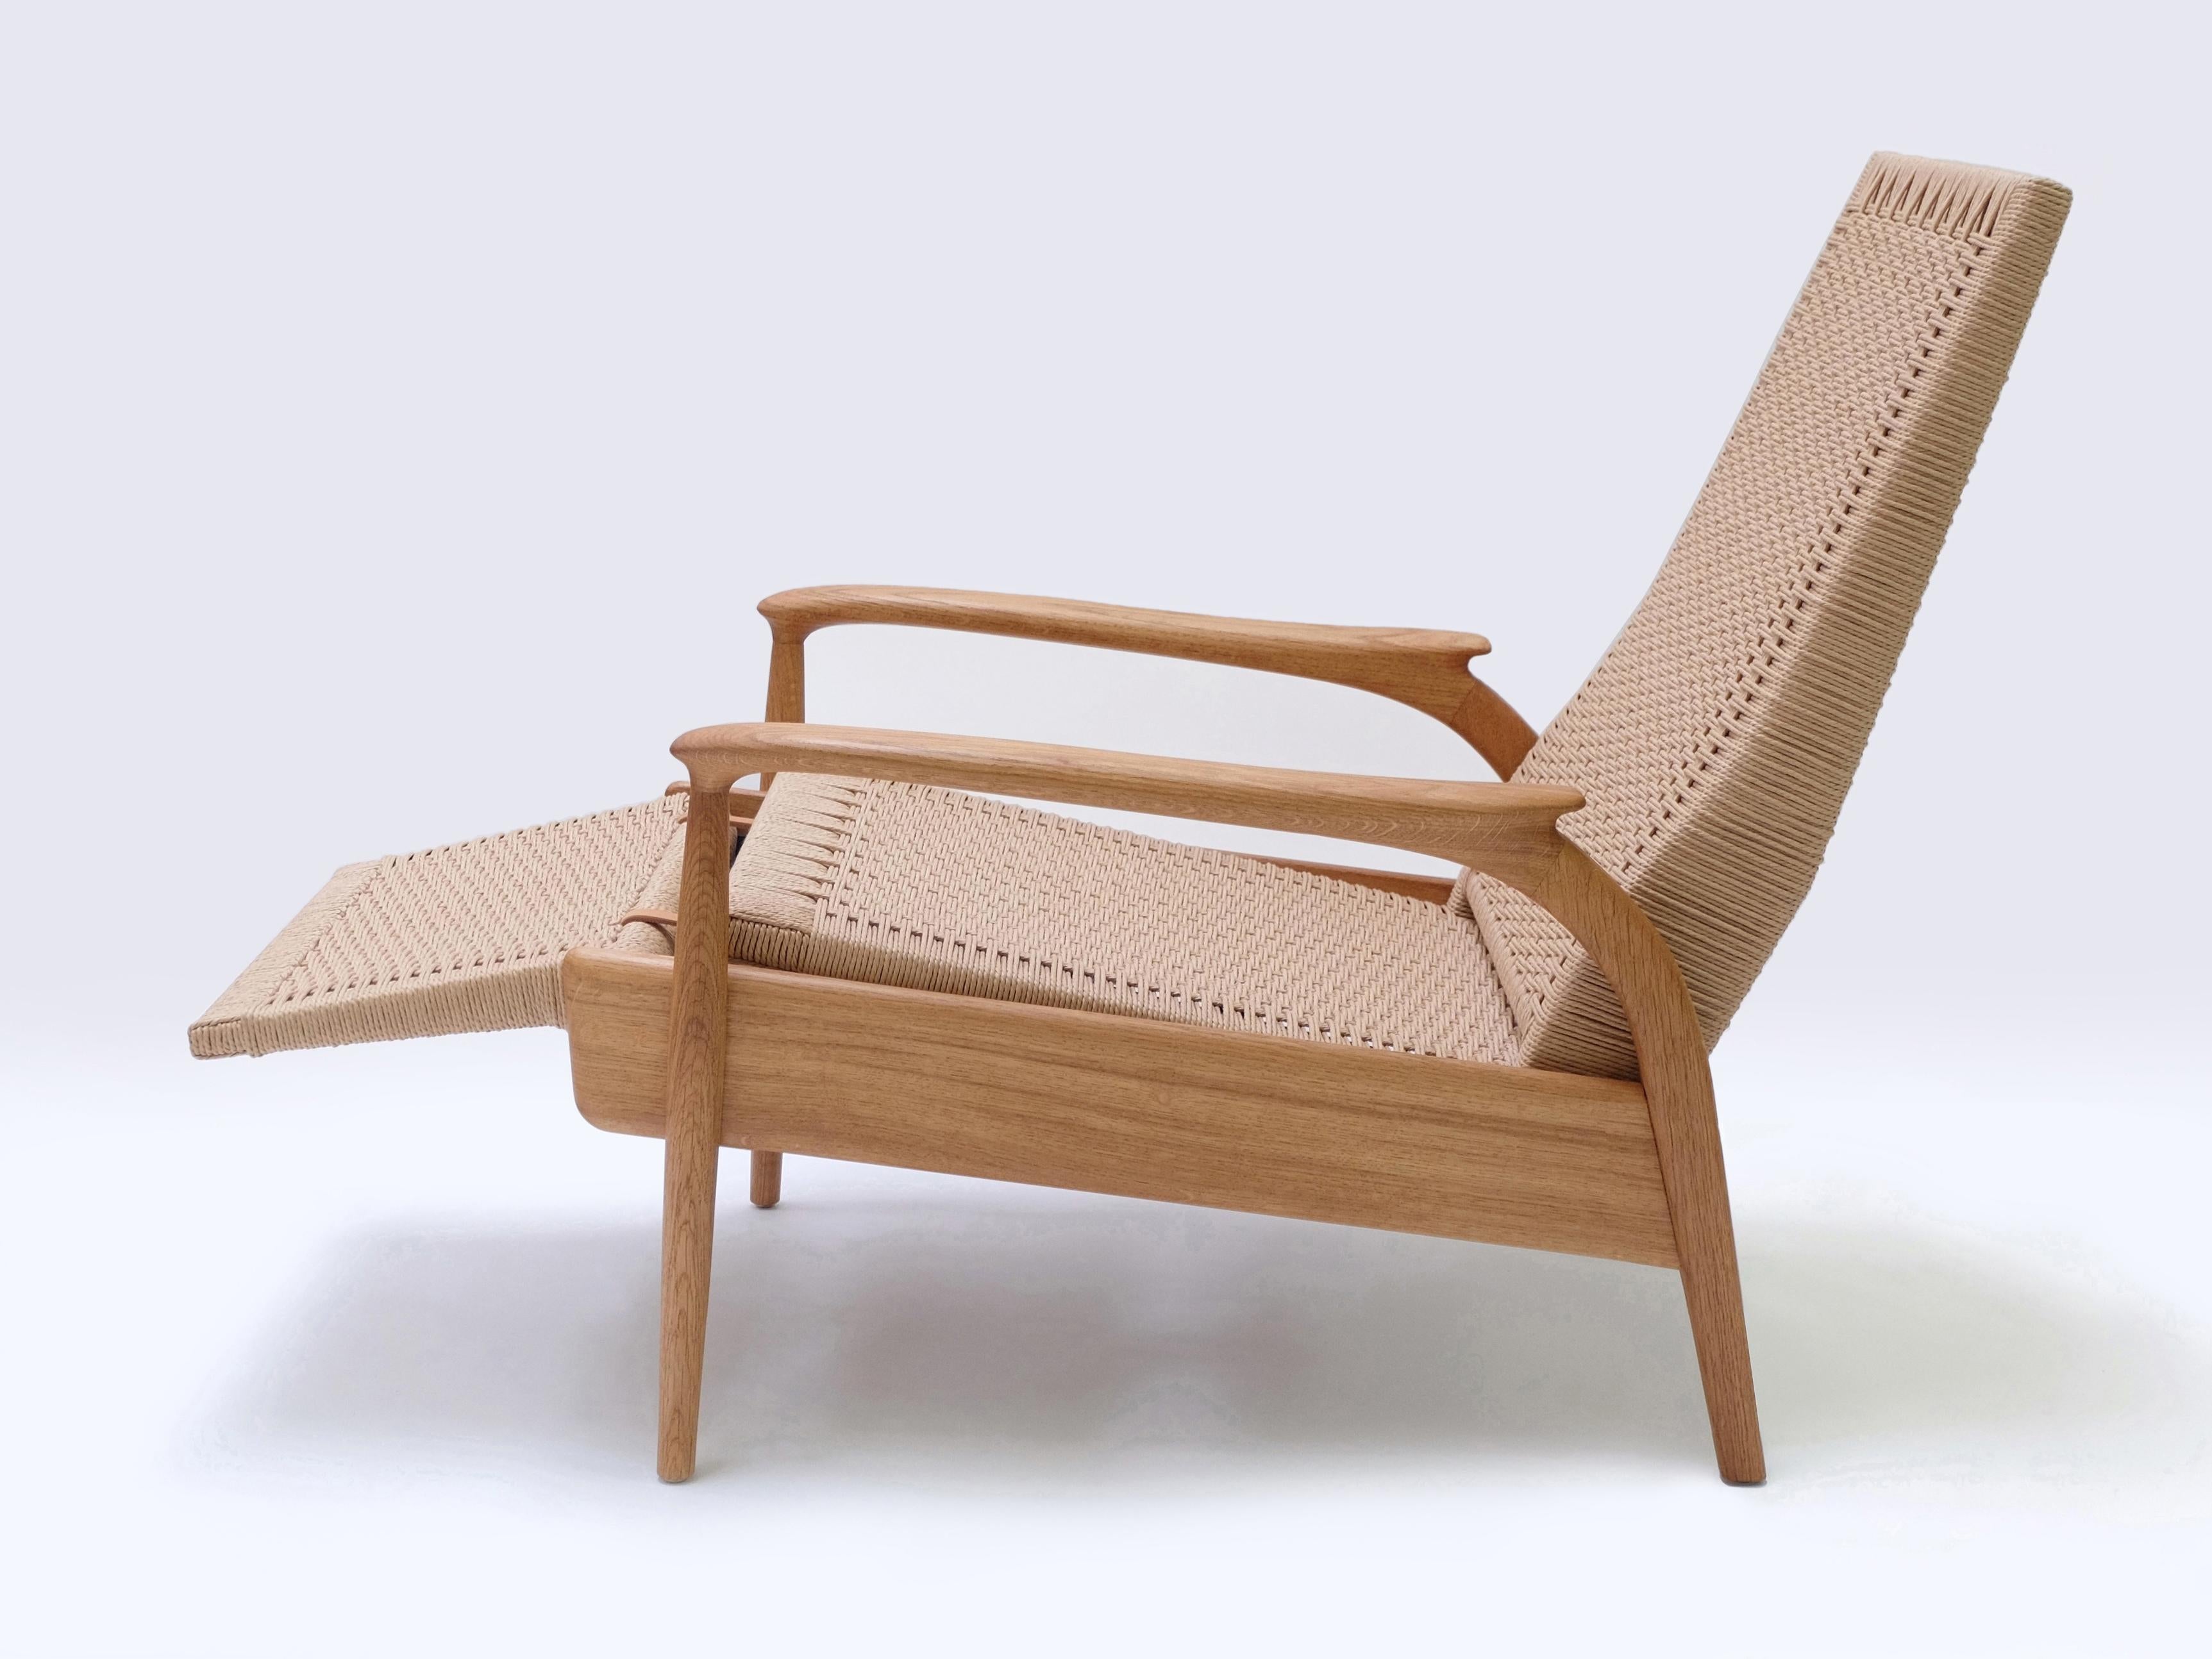 Hand-Woven Pair of Reclining Armchairs, Solid Oak, Natural Danish Cord, Leather Cushions For Sale